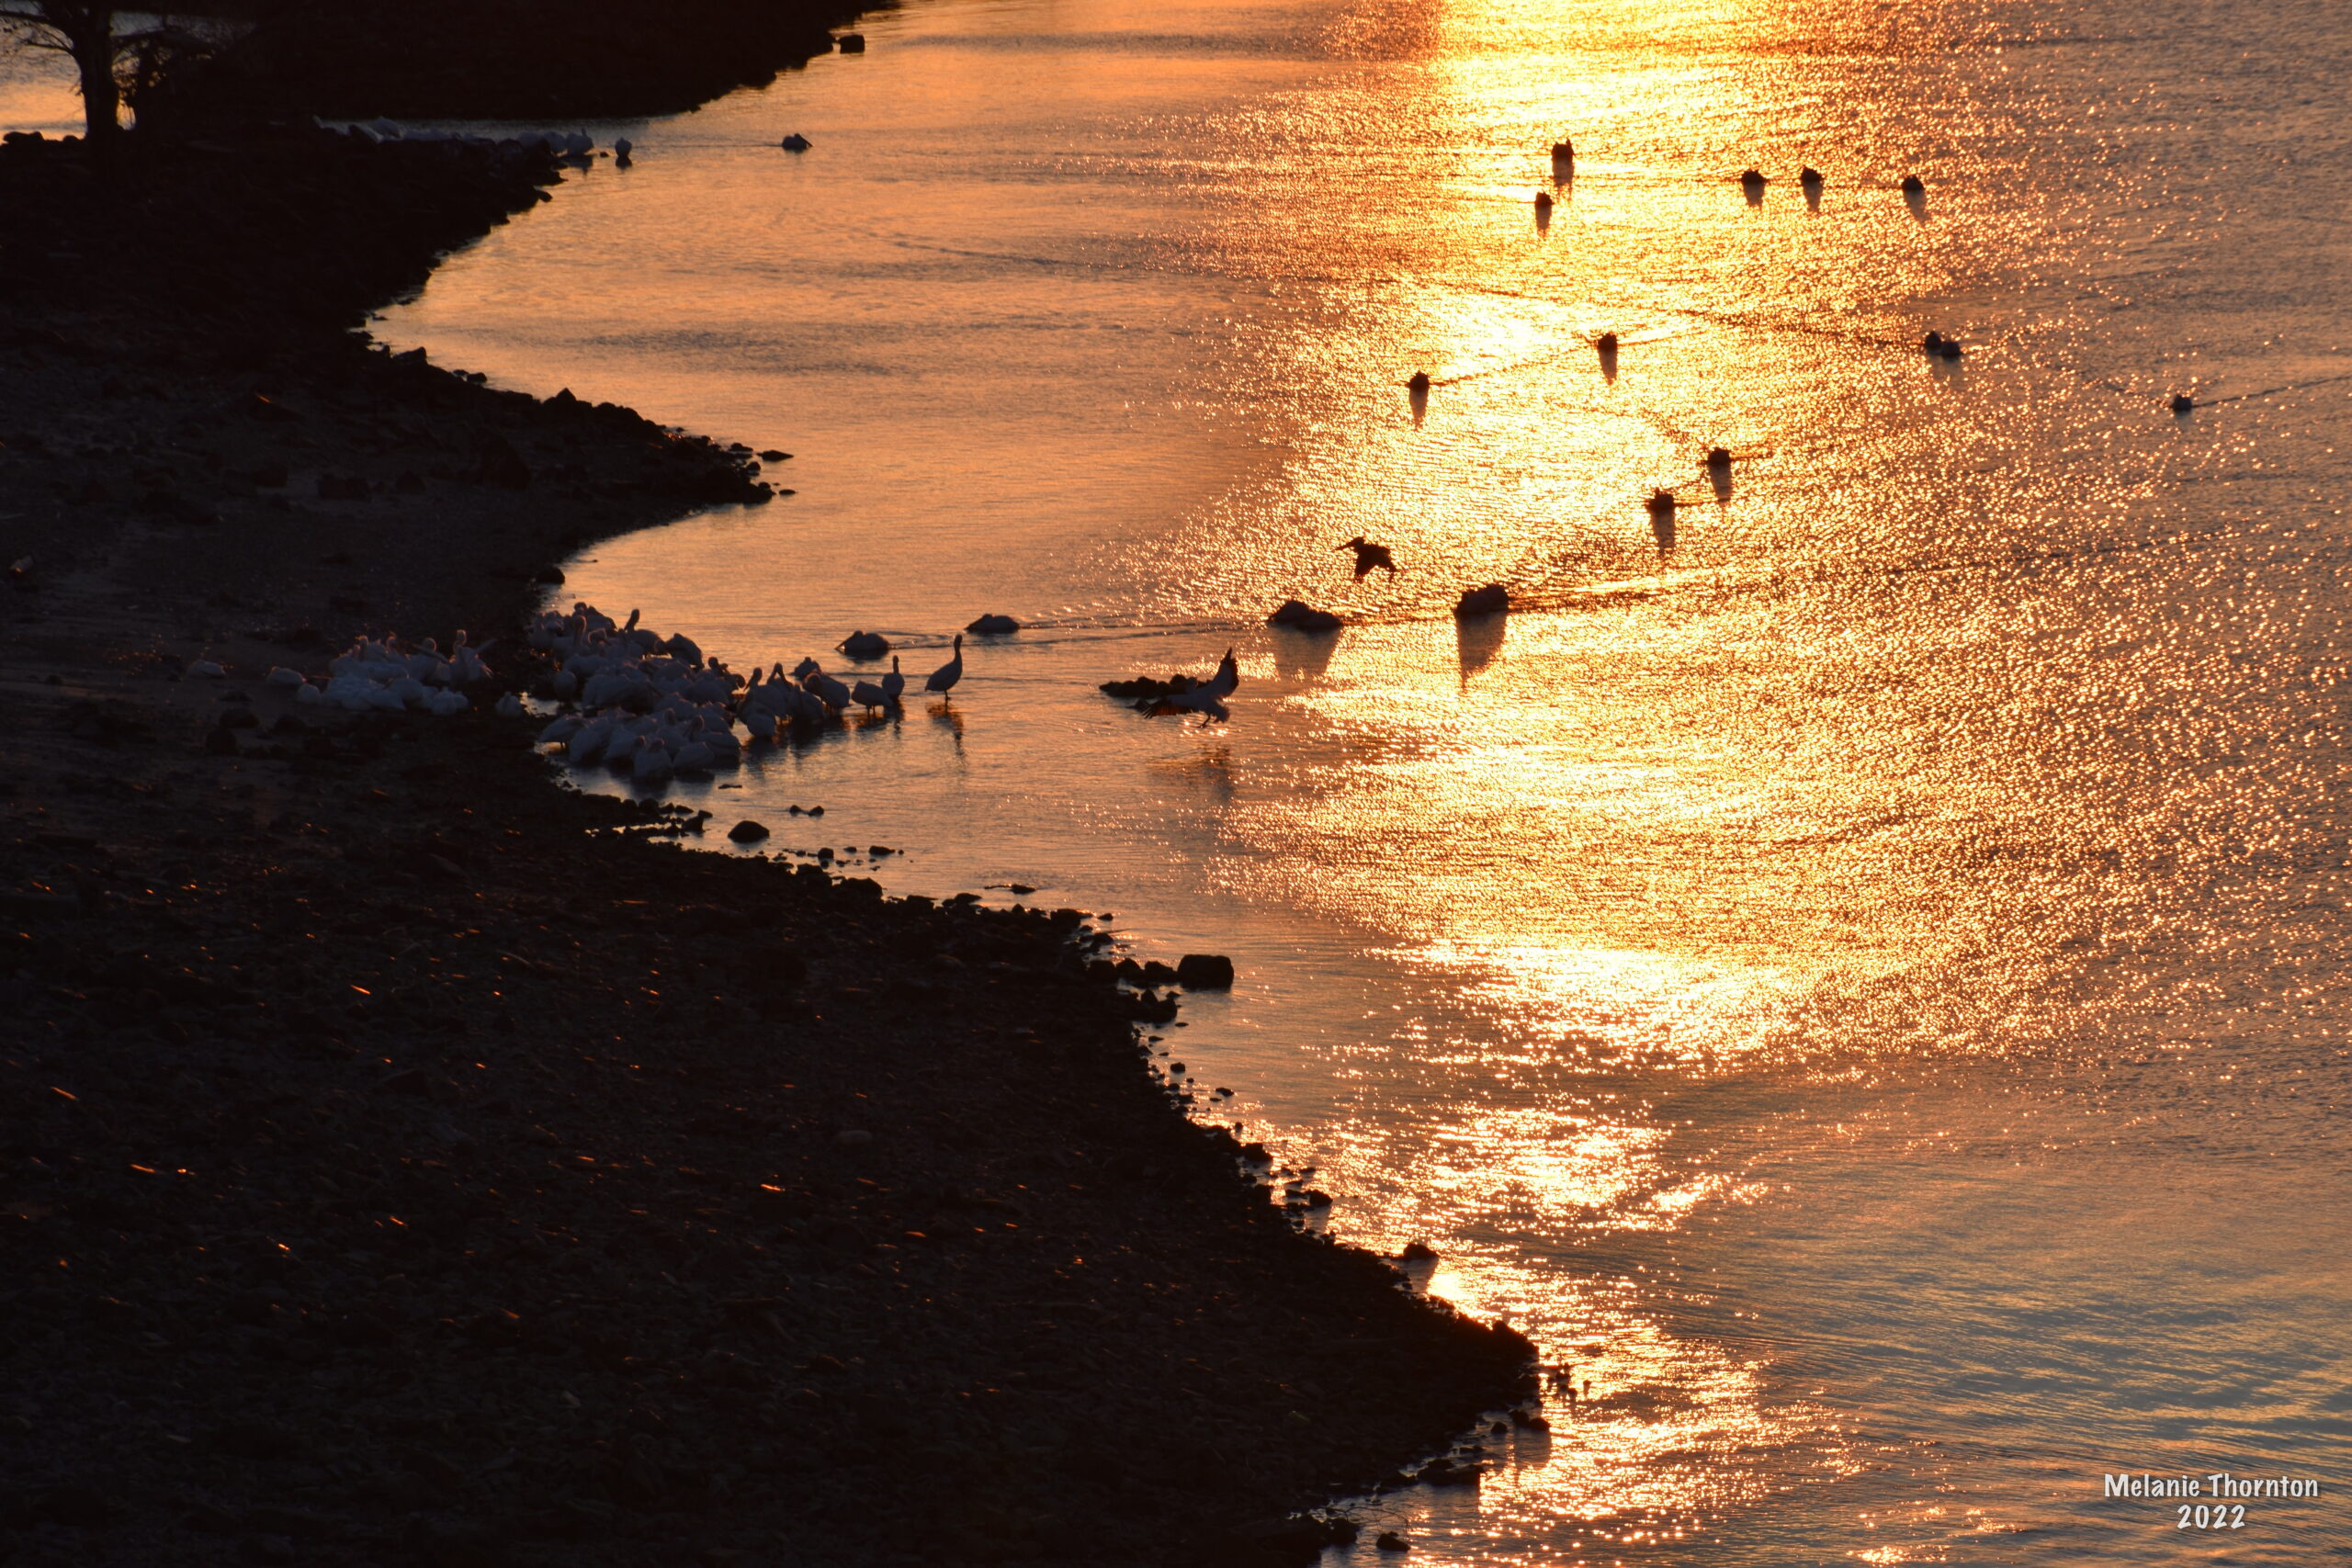 A bright orange and yellow body of water with more than ten birds floating on the surface near a shoreline.